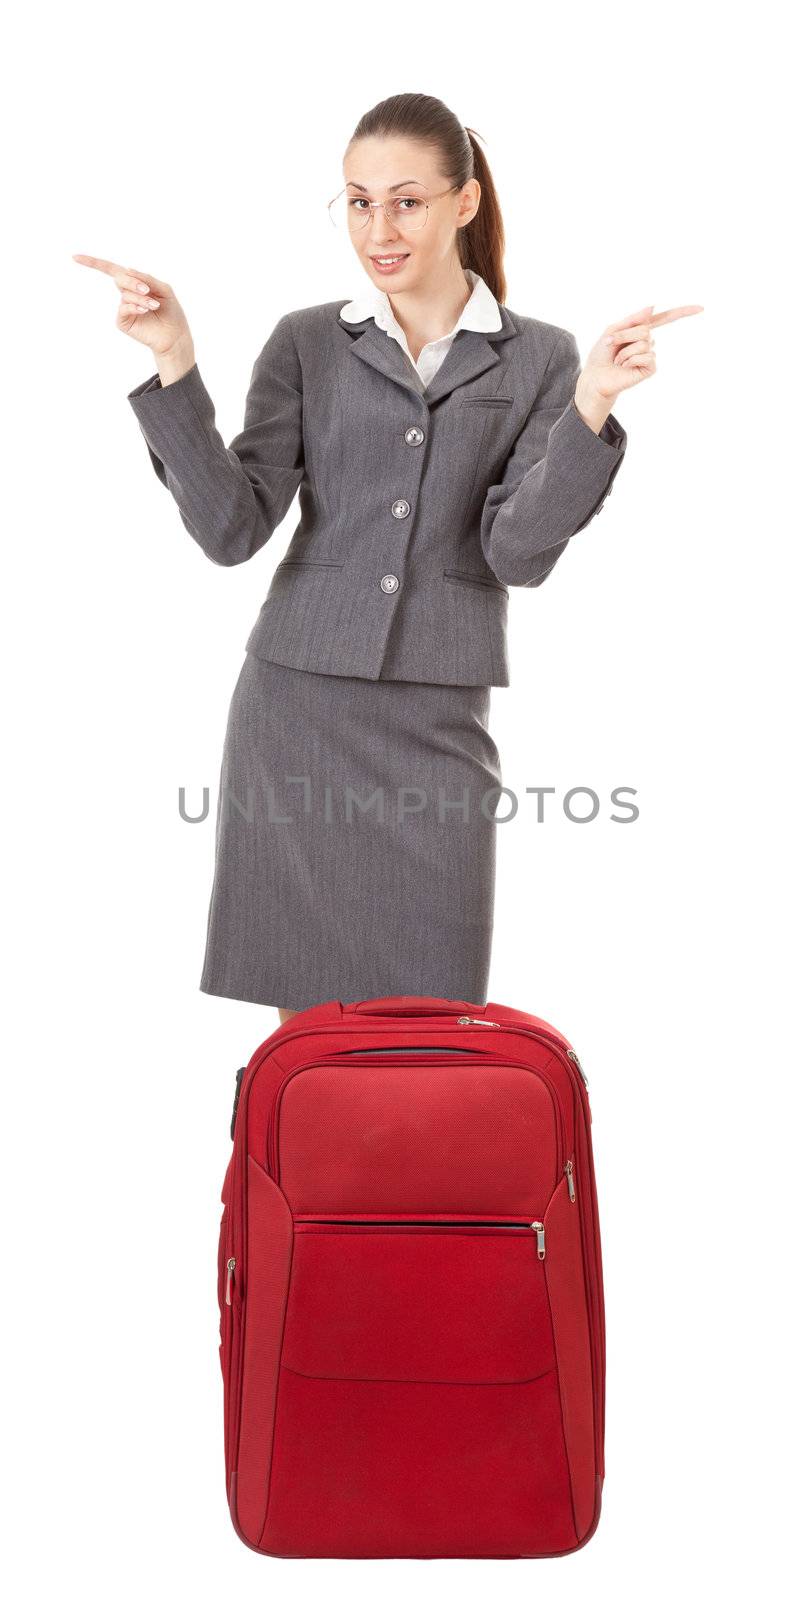 office manager, a girl in business attire